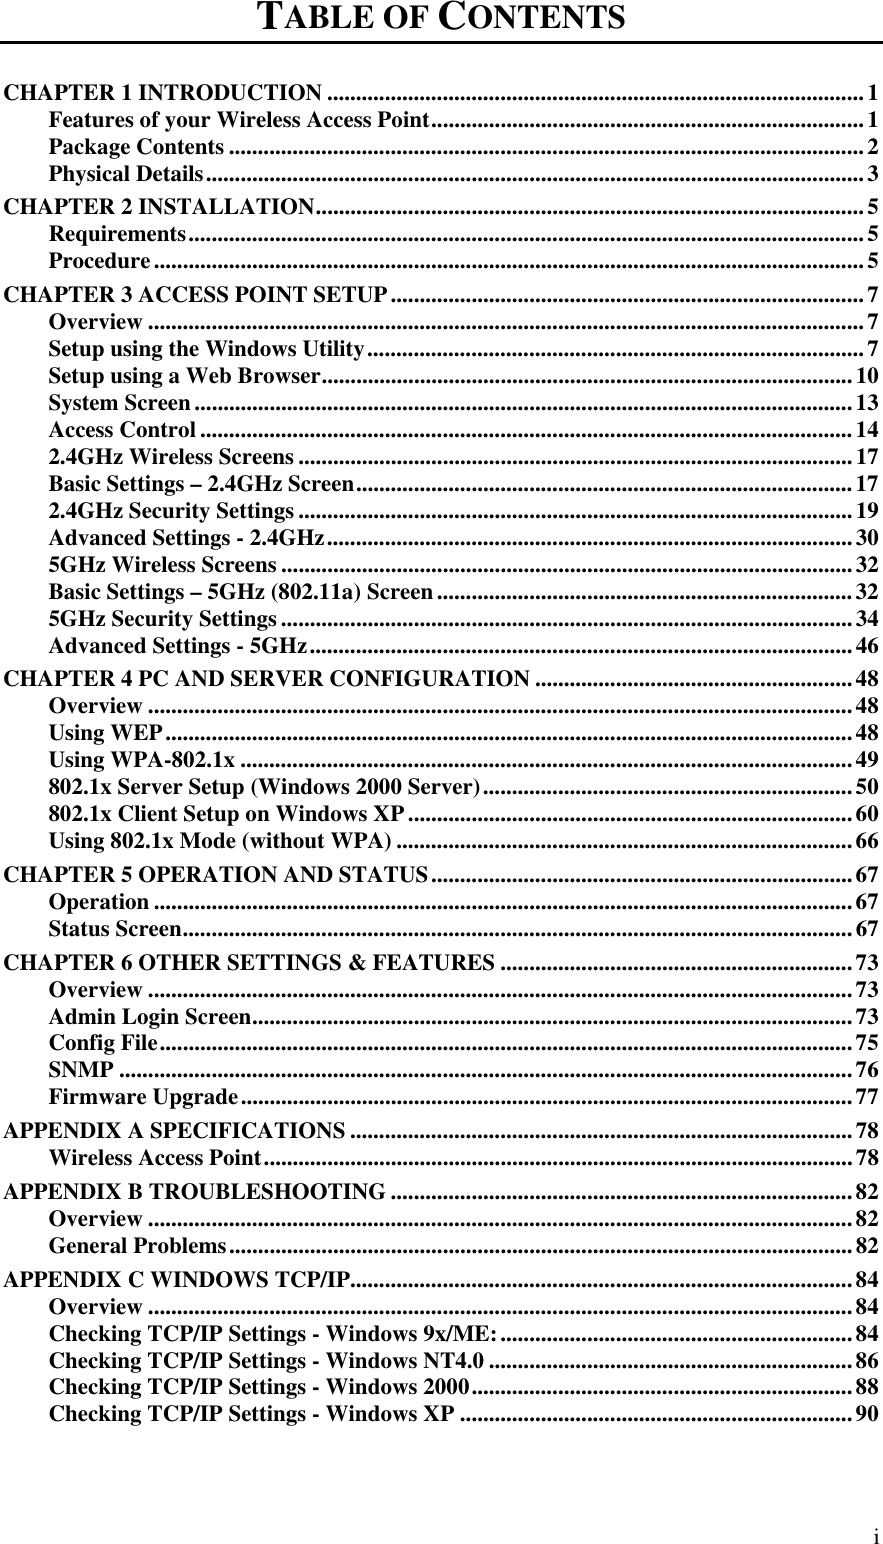   i TABLE OF CONTENTS CHAPTER 1 INTRODUCTION .............................................................................................1 Features of your Wireless Access Point...........................................................................1 Package Contents ..............................................................................................................2 Physical Details..................................................................................................................3 CHAPTER 2 INSTALLATION...............................................................................................5 Requirements.....................................................................................................................5 Procedure...........................................................................................................................5 CHAPTER 3 ACCESS POINT SETUP..................................................................................7 Overview ............................................................................................................................7 Setup using the Windows Utility......................................................................................7 Setup using a Web Browser............................................................................................10 System Screen..................................................................................................................13 Access Control .................................................................................................................14 2.4GHz Wireless Screens ................................................................................................17 Basic Settings – 2.4GHz Screen......................................................................................17 2.4GHz Security Settings................................................................................................19 Advanced Settings - 2.4GHz...........................................................................................30 5GHz Wireless Screens ...................................................................................................32 Basic Settings – 5GHz (802.11a) Screen........................................................................32 5GHz Security Settings ...................................................................................................34 Advanced Settings - 5GHz..............................................................................................46 CHAPTER 4 PC AND SERVER CONFIGURATION .......................................................48 Overview ..........................................................................................................................48 Using WEP.......................................................................................................................48 Using WPA-802.1x ..........................................................................................................49 802.1x Server Setup (Windows 2000 Server)................................................................50 802.1x Client Setup on Windows XP .............................................................................60 Using 802.1x Mode (without WPA) ...............................................................................66 CHAPTER 5 OPERATION AND STATUS.........................................................................67 Operation .........................................................................................................................67 Status Screen....................................................................................................................67 CHAPTER 6 OTHER SETTINGS &amp; FEATURES .............................................................73 Overview ..........................................................................................................................73 Admin Login Screen........................................................................................................73 Config File........................................................................................................................75 SNMP ...............................................................................................................................76 Firmware Upgrade..........................................................................................................77 APPENDIX A SPECIFICATIONS .......................................................................................78 Wireless Access Point......................................................................................................78 APPENDIX B TROUBLESHOOTING ................................................................................82 Overview ..........................................................................................................................82 General Problems............................................................................................................82 APPENDIX C WINDOWS TCP/IP.......................................................................................84 Overview ..........................................................................................................................84 Checking TCP/IP Settings - Windows 9x/ME:.............................................................84 Checking TCP/IP Settings - Windows NT4.0 ...............................................................86 Checking TCP/IP Settings - Windows 2000..................................................................88 Checking TCP/IP Settings - Windows XP ....................................................................90 